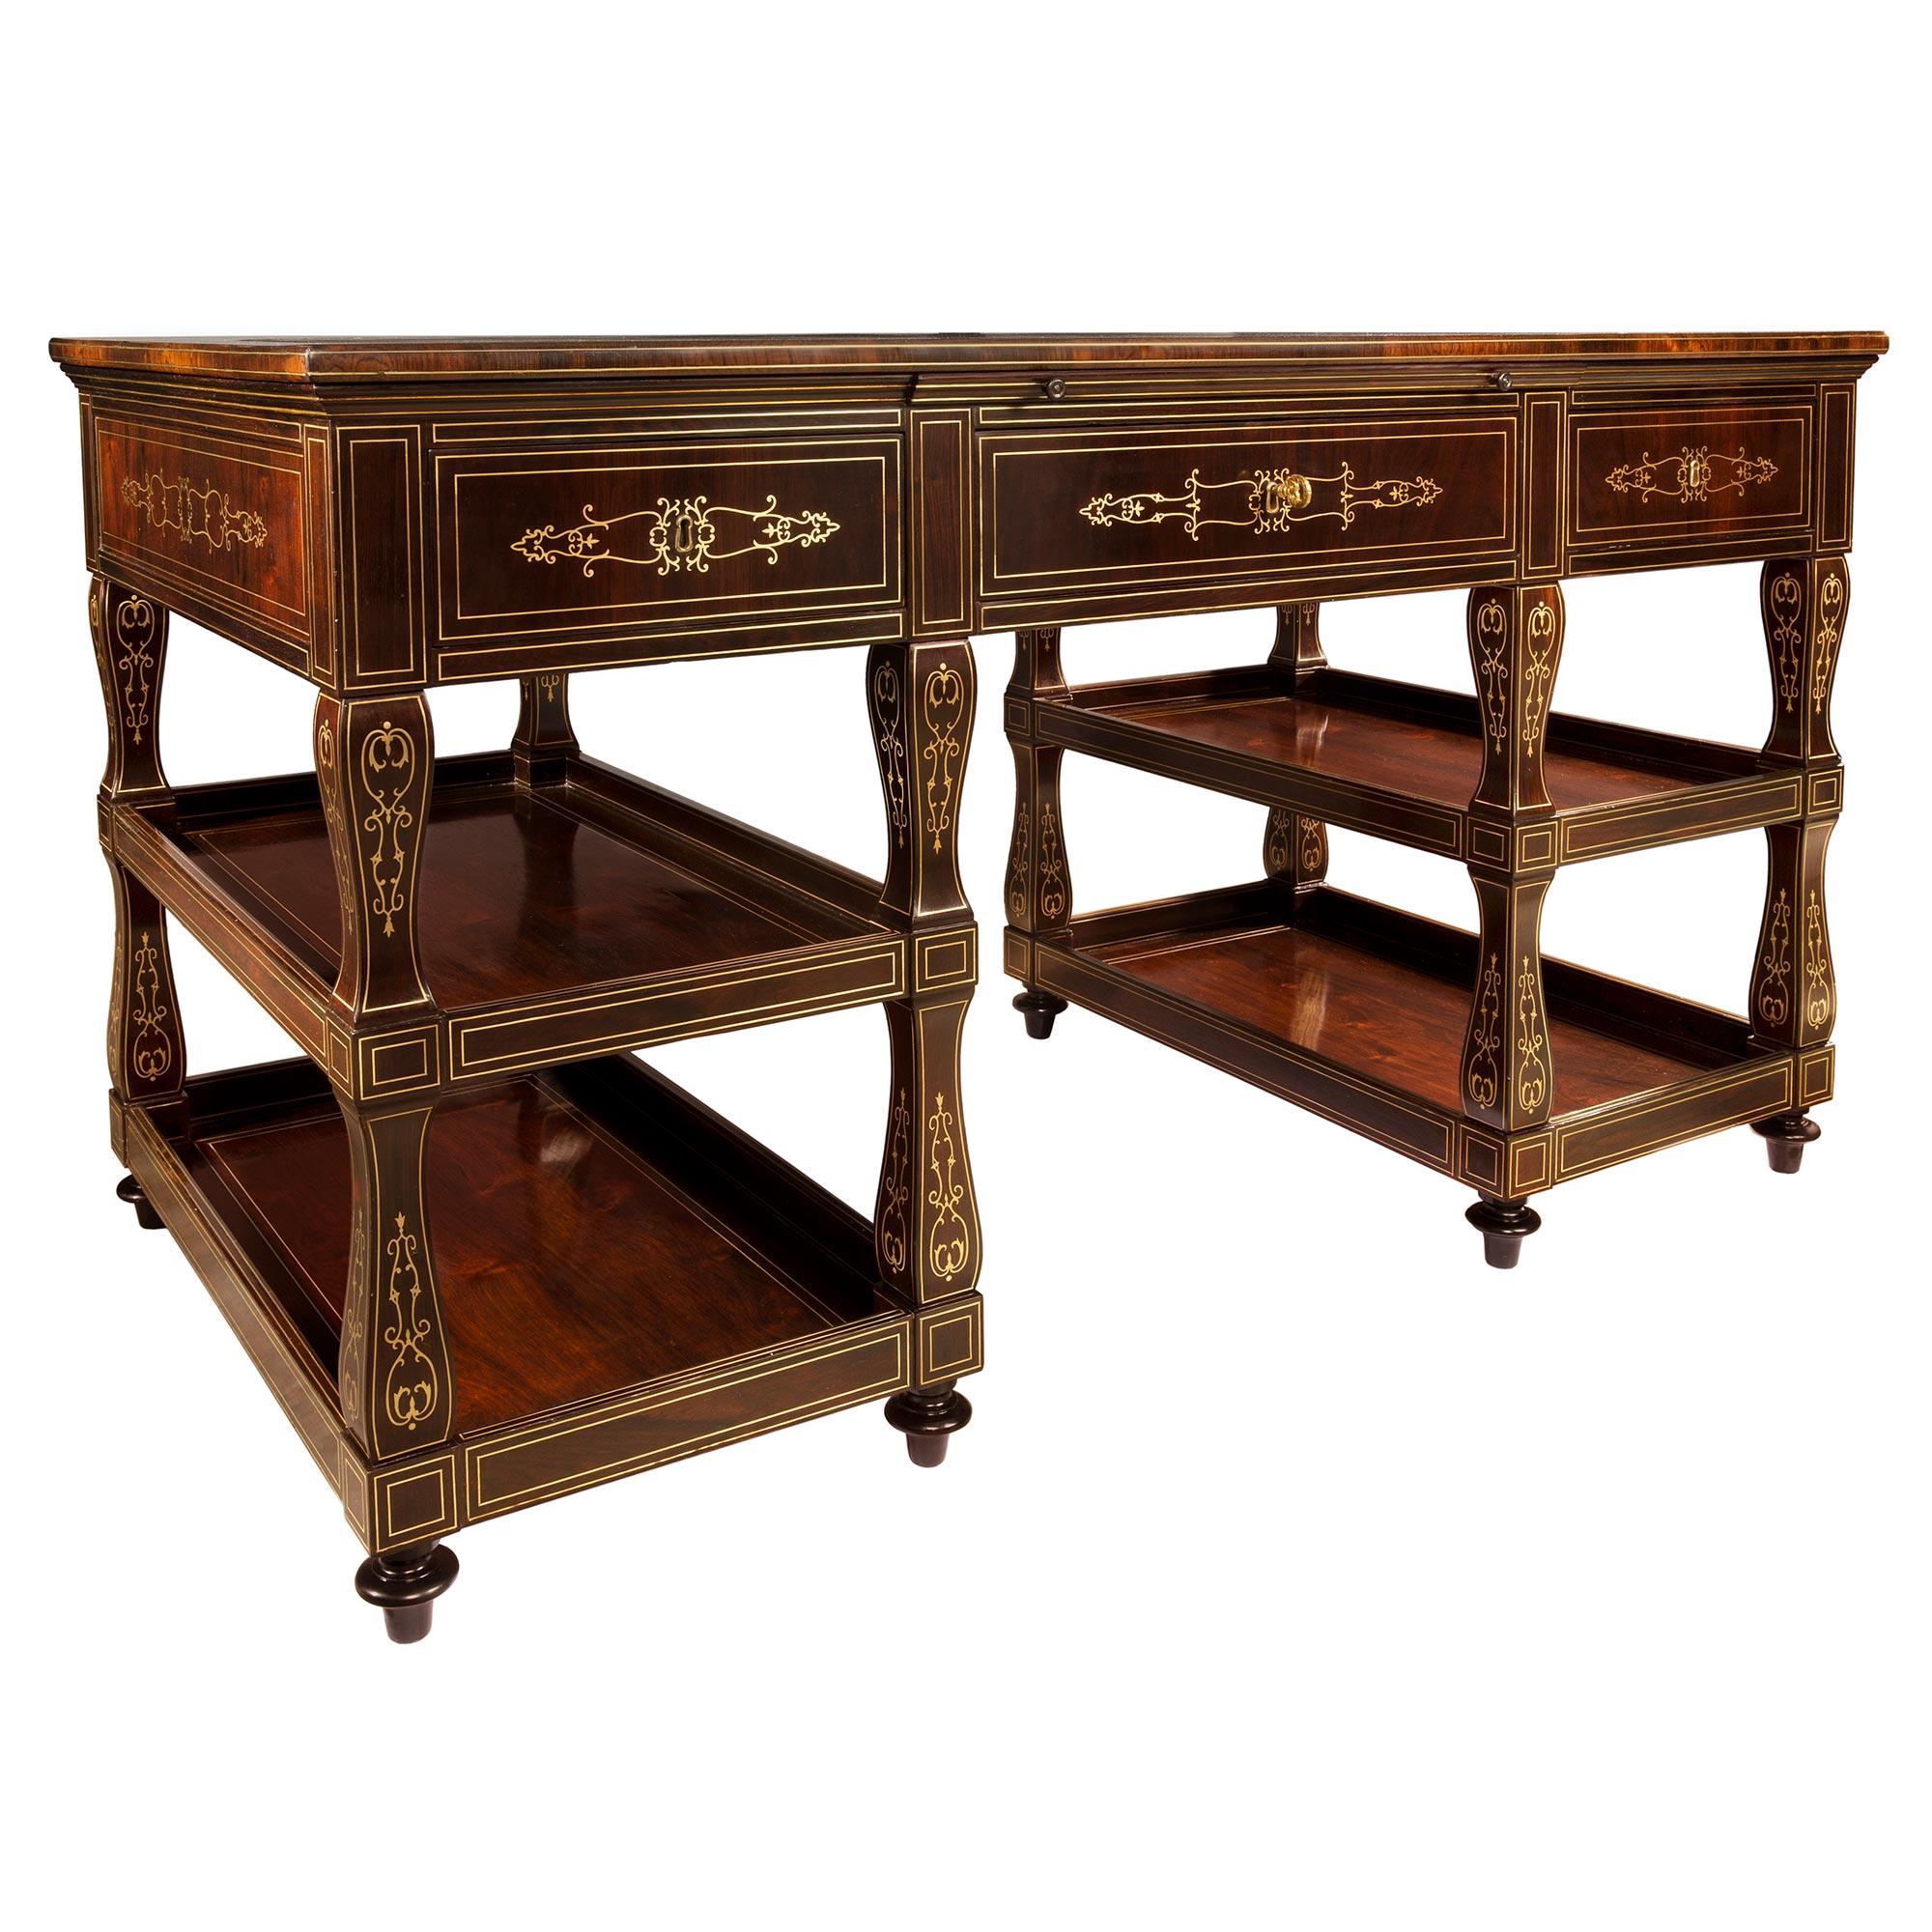 French 19th Century Charles X Period Rosewood and Brass Inlaid Desk In Good Condition For Sale In West Palm Beach, FL